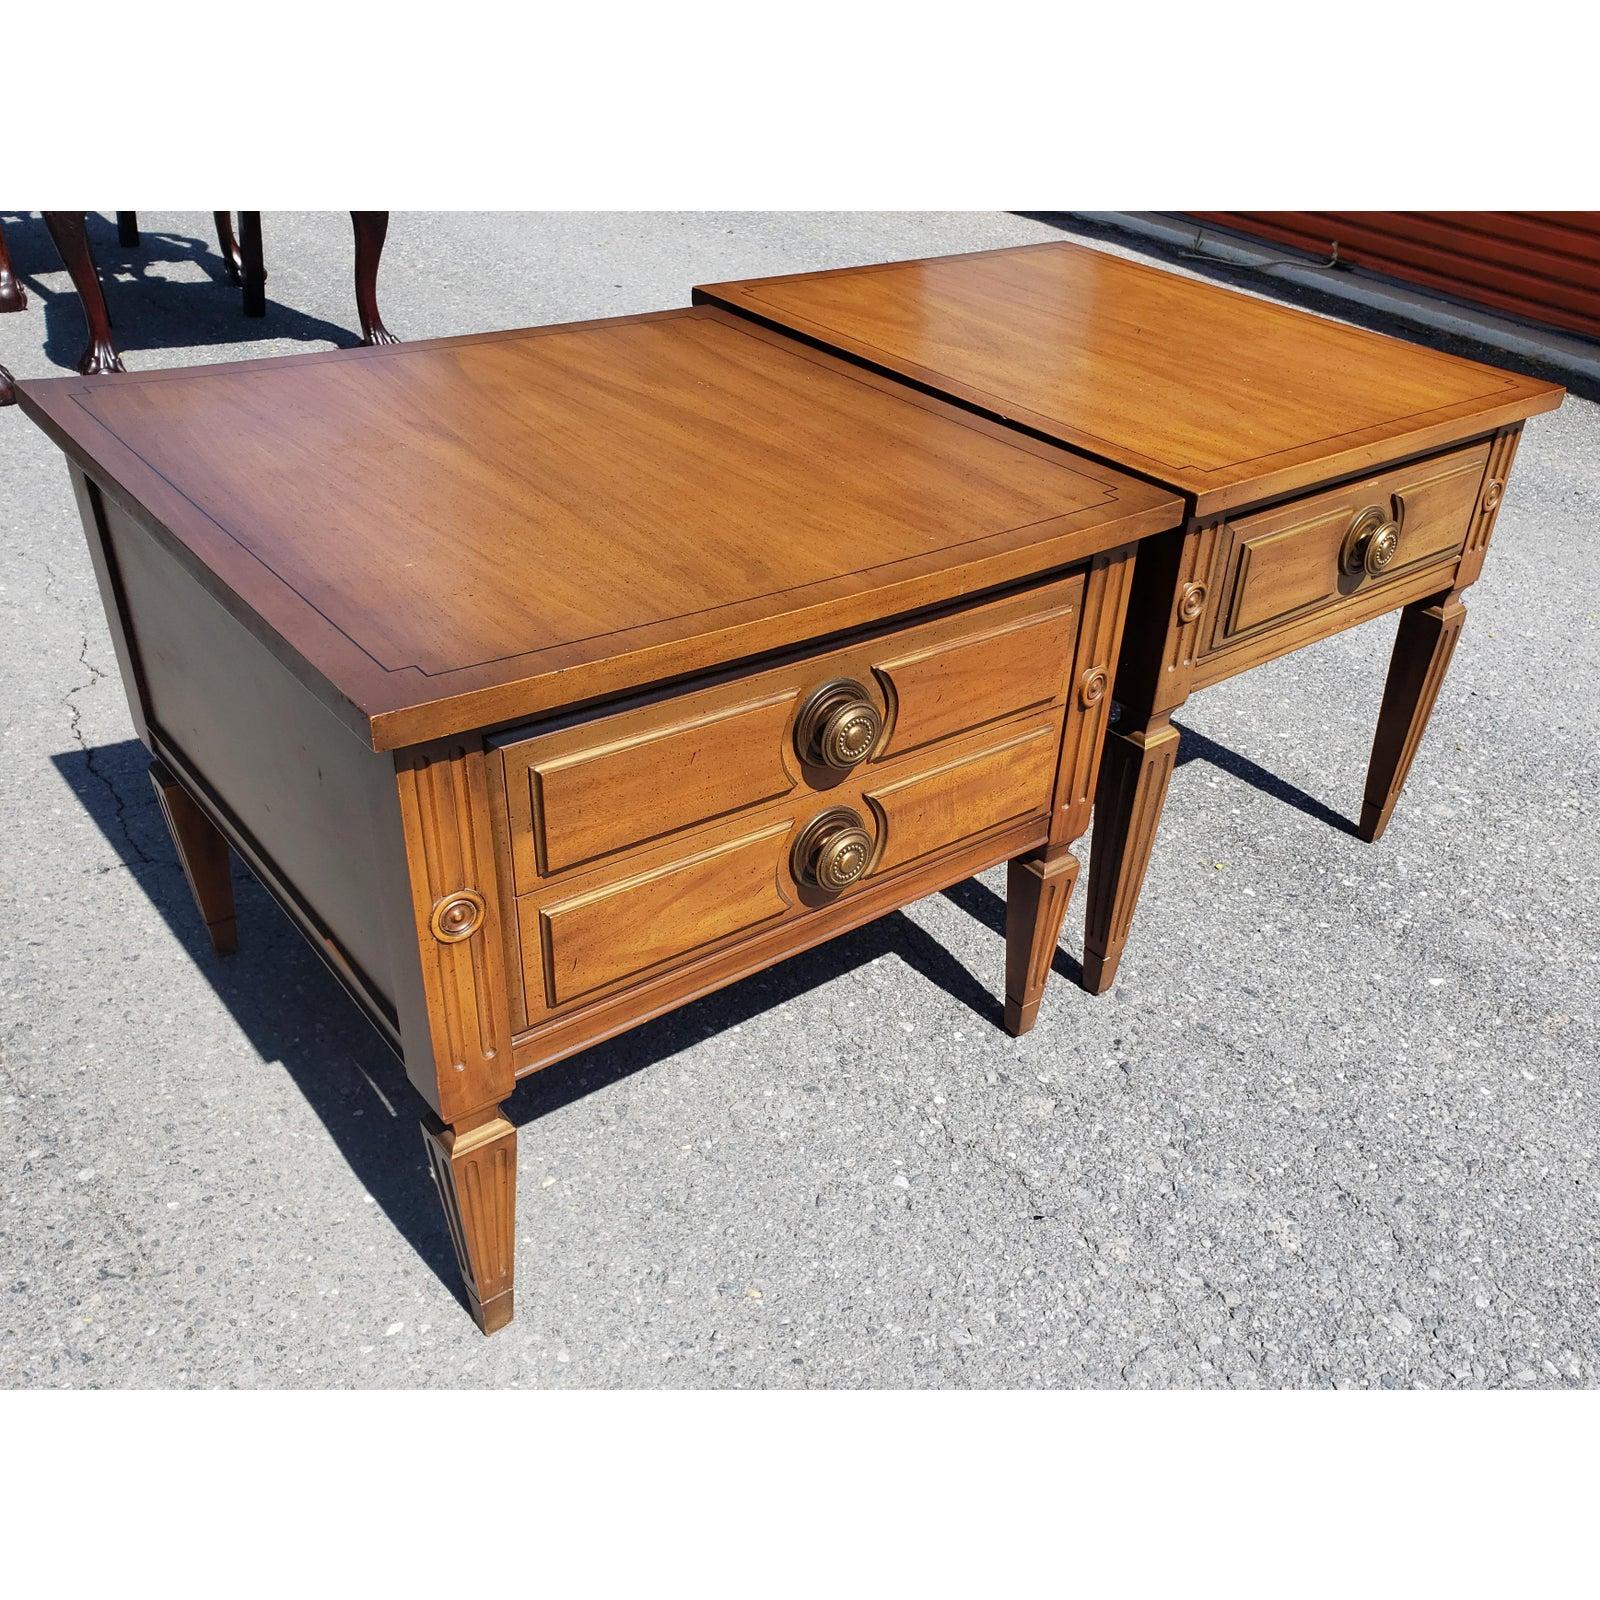 Two side tables from American of Martinsville one (rectangular) measures 21 inches tall by 22 inches wide by 27 inches deep. Second ( square) measures 21 inches high by 25 inches wide by 25 inches deep.
There is some wear and nicks noted on the